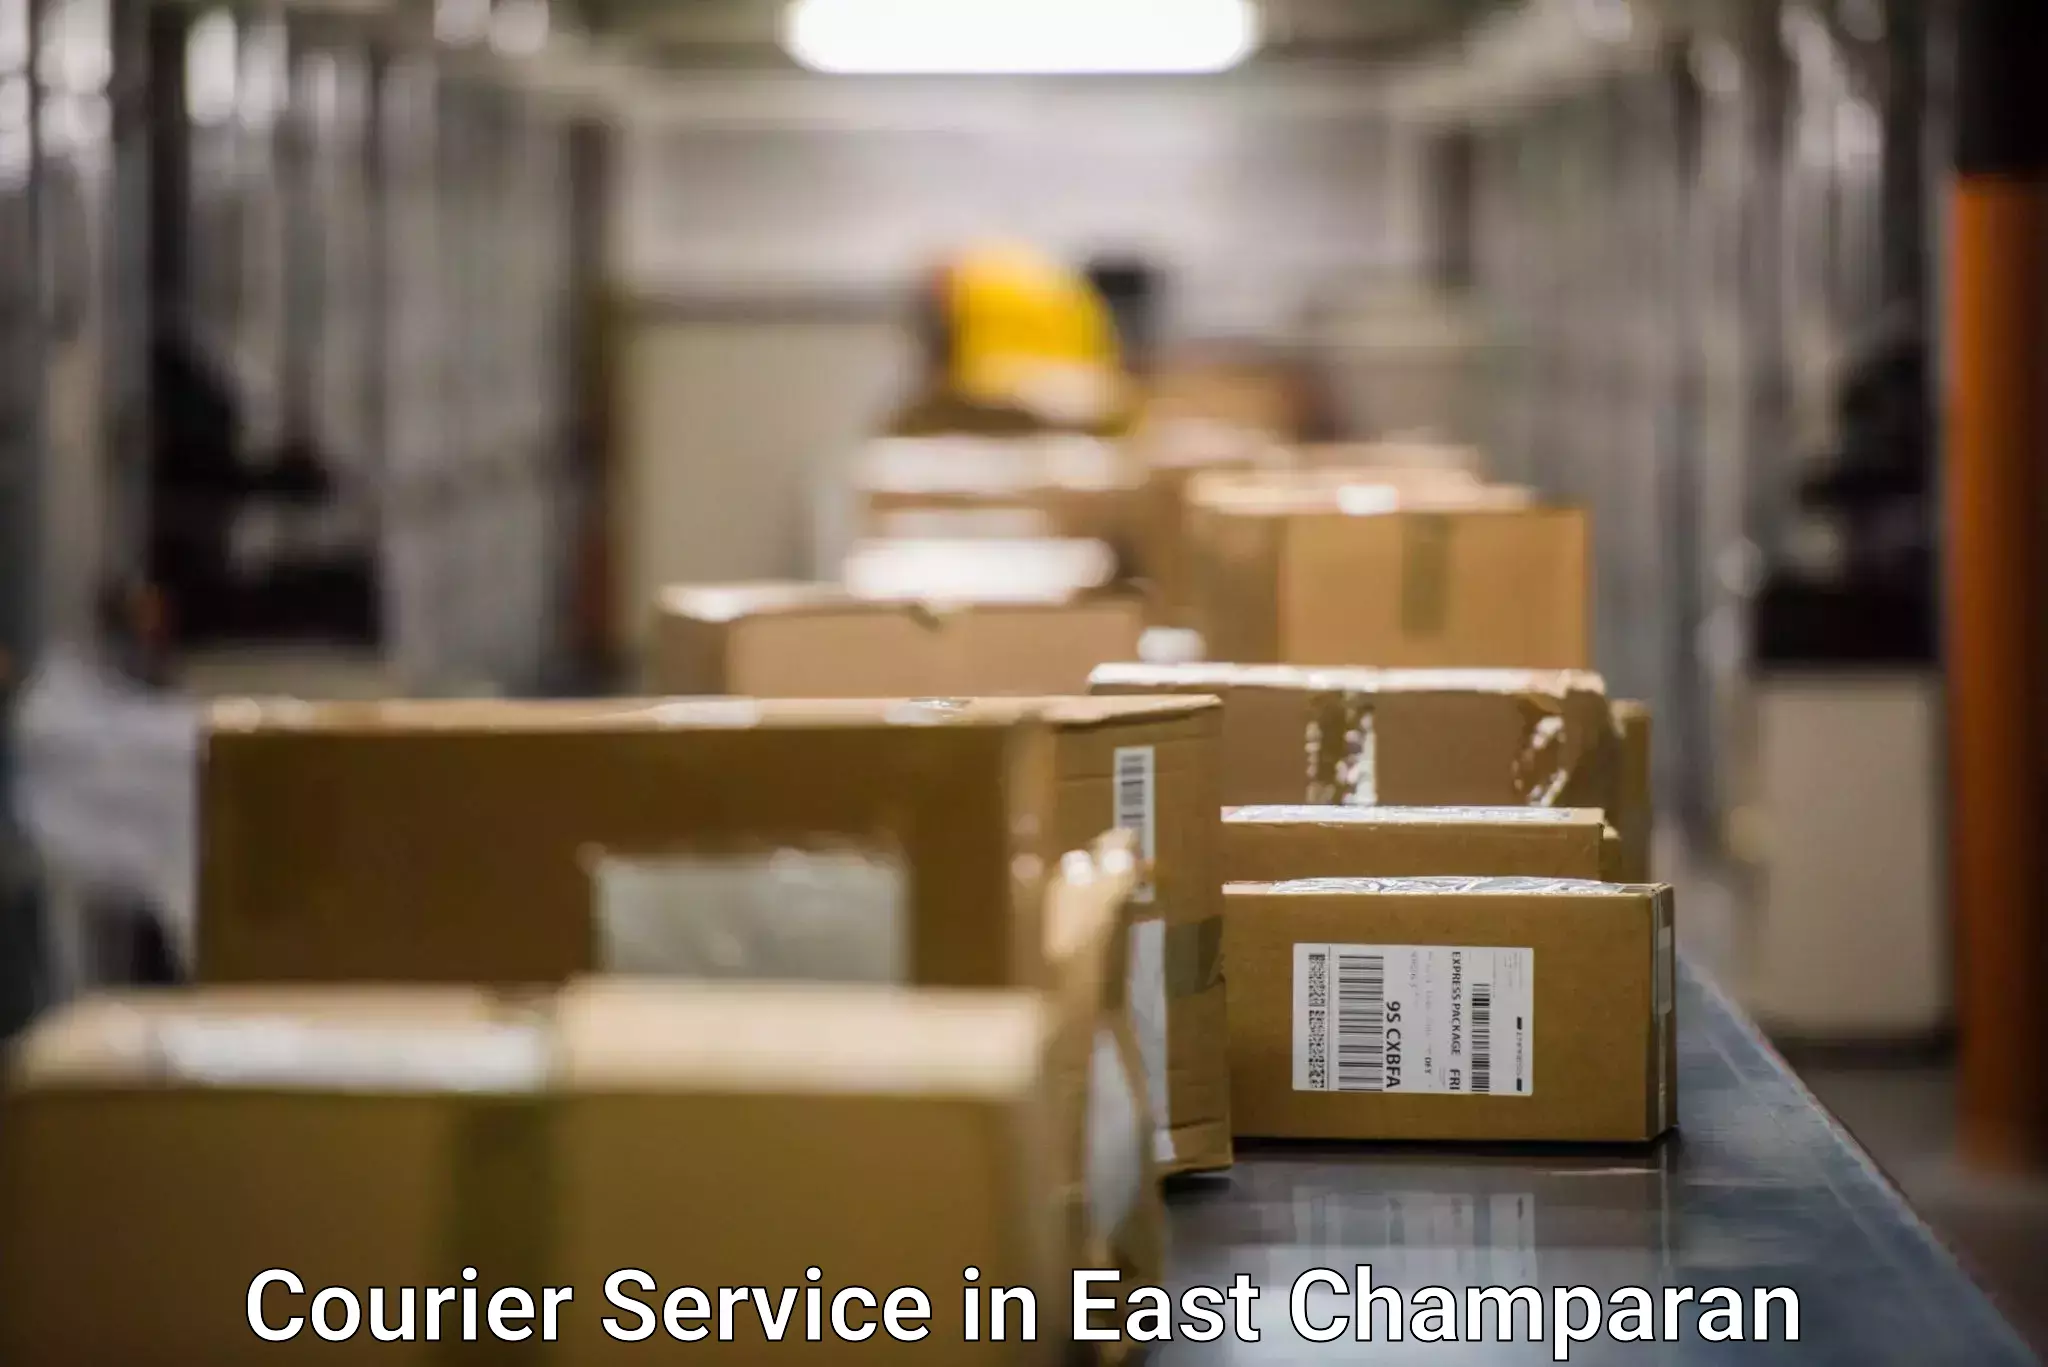 High value parcel delivery in East Champaran